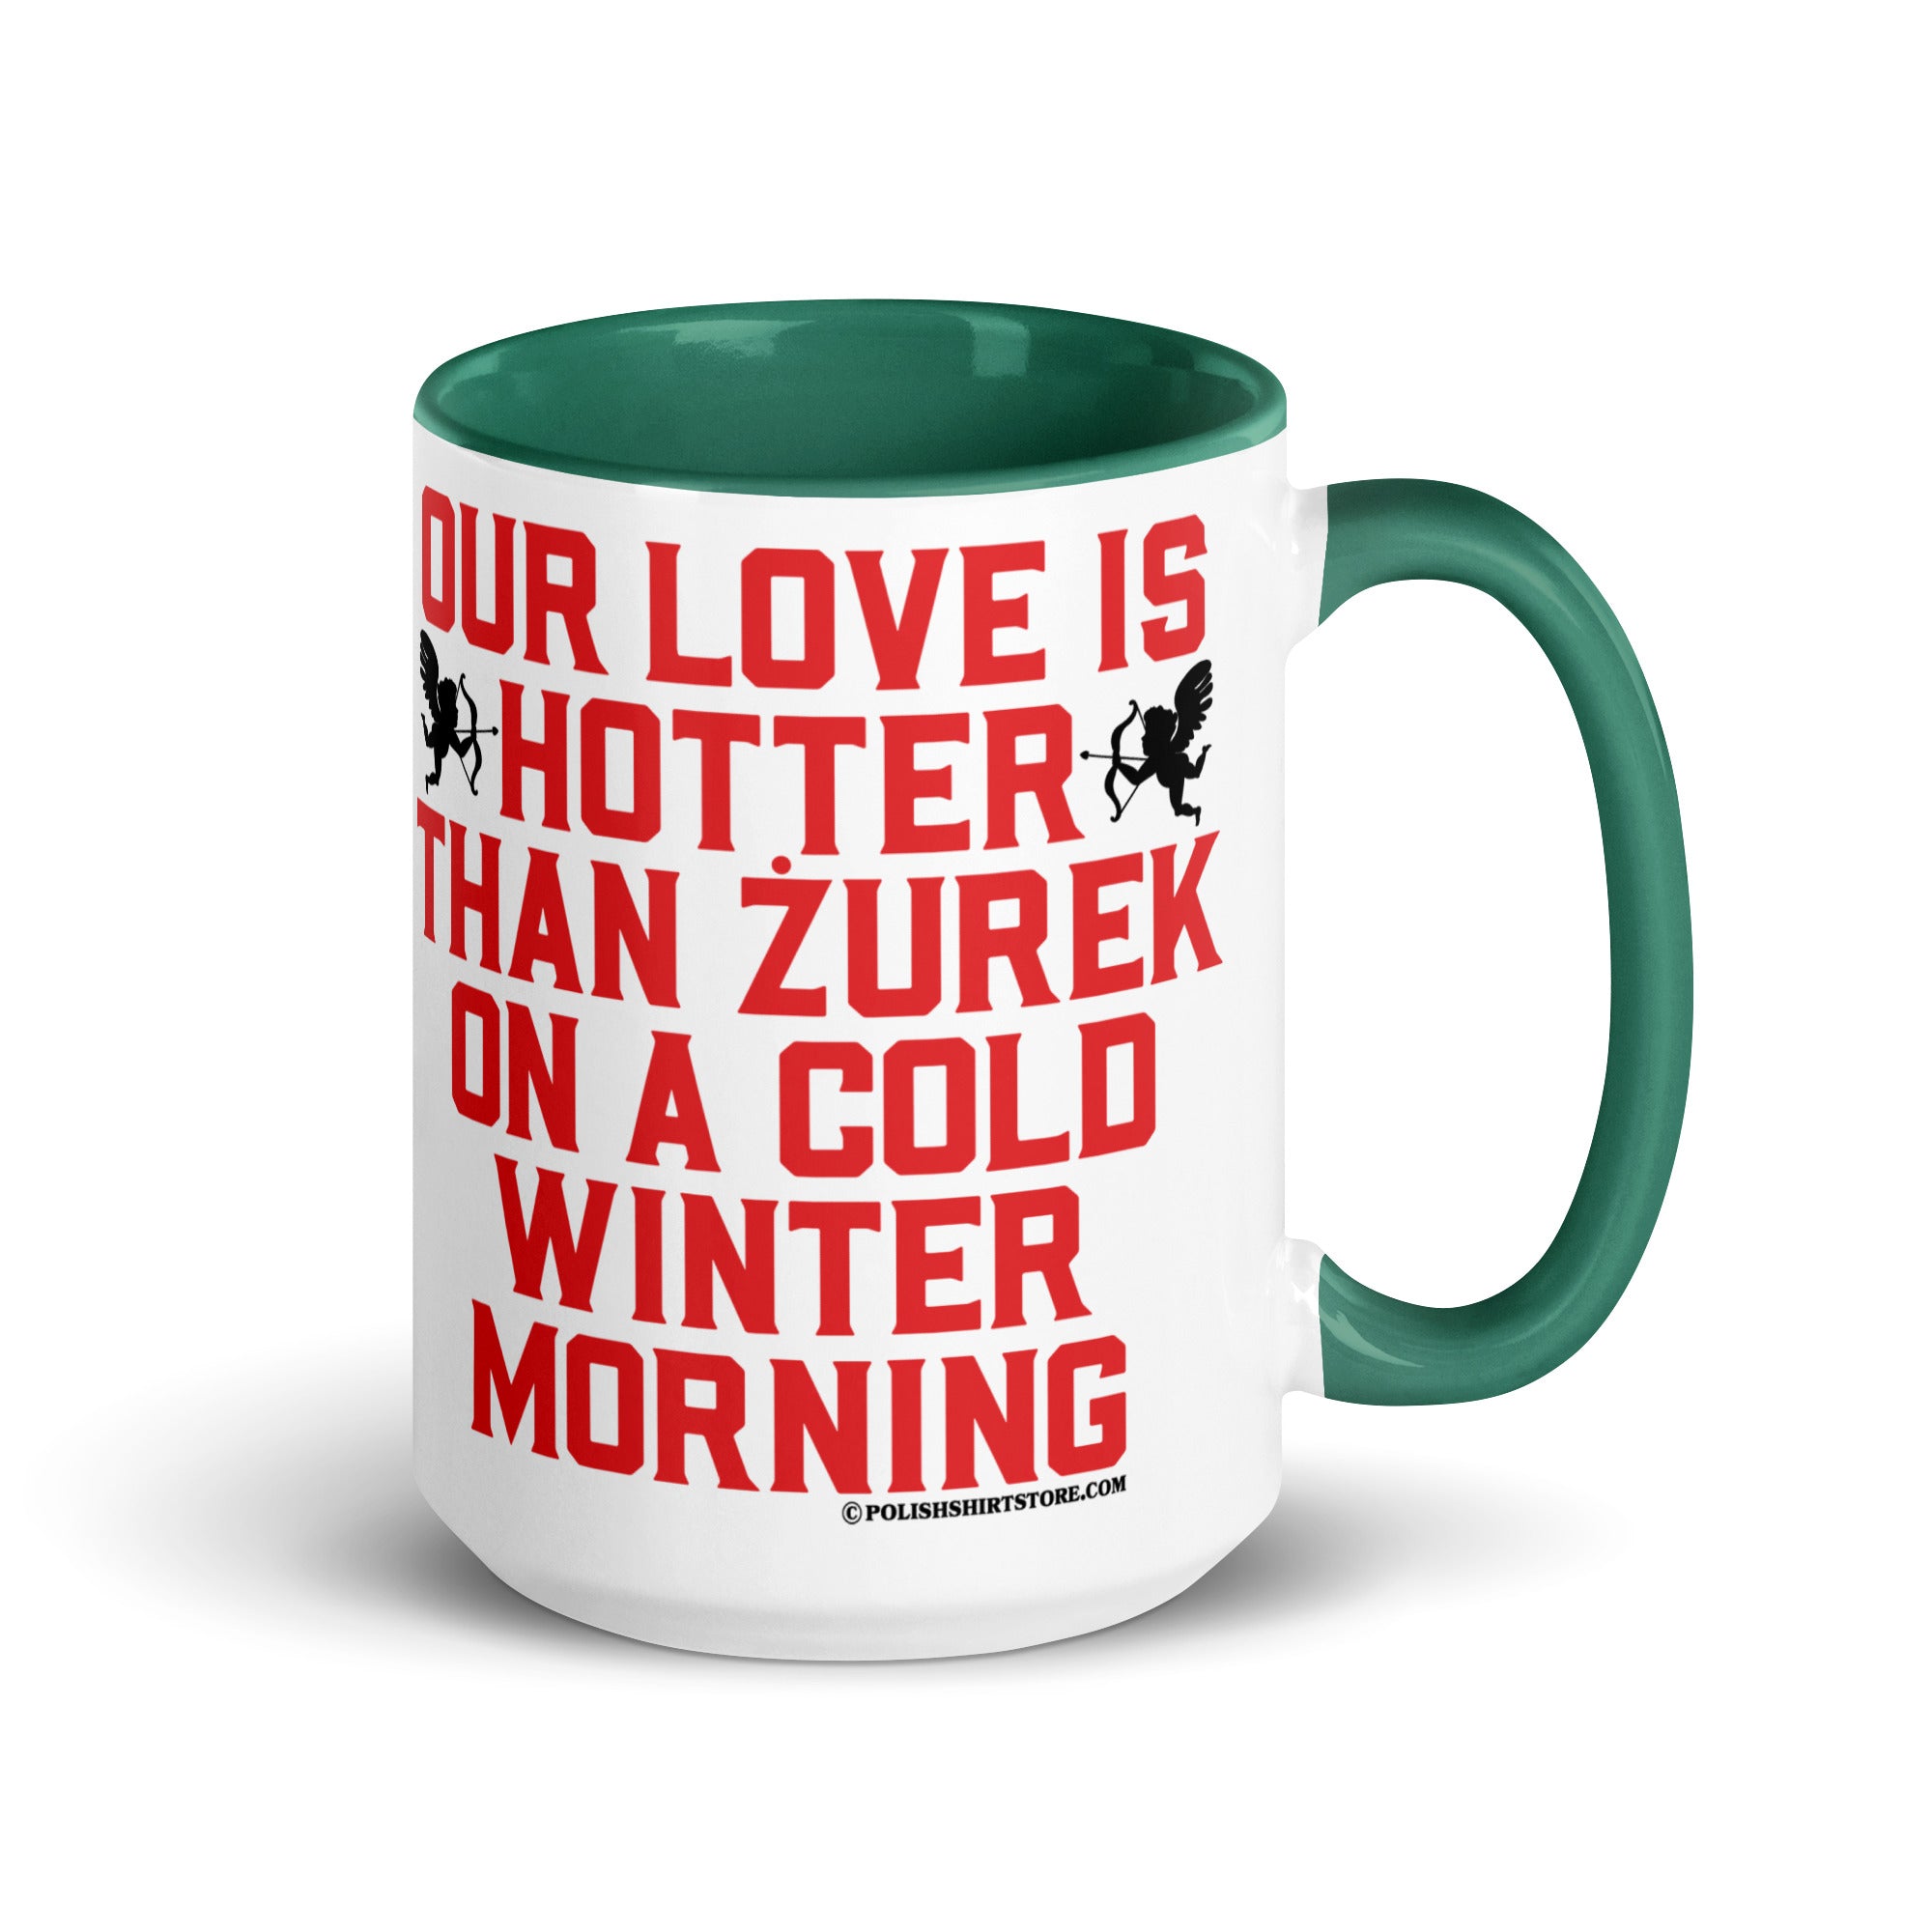 Our Love Is Hotter Than Zurek On A Cold Winter Morning Coffee Mug with Color Inside  Polish Shirt Store Dark green 15 oz 